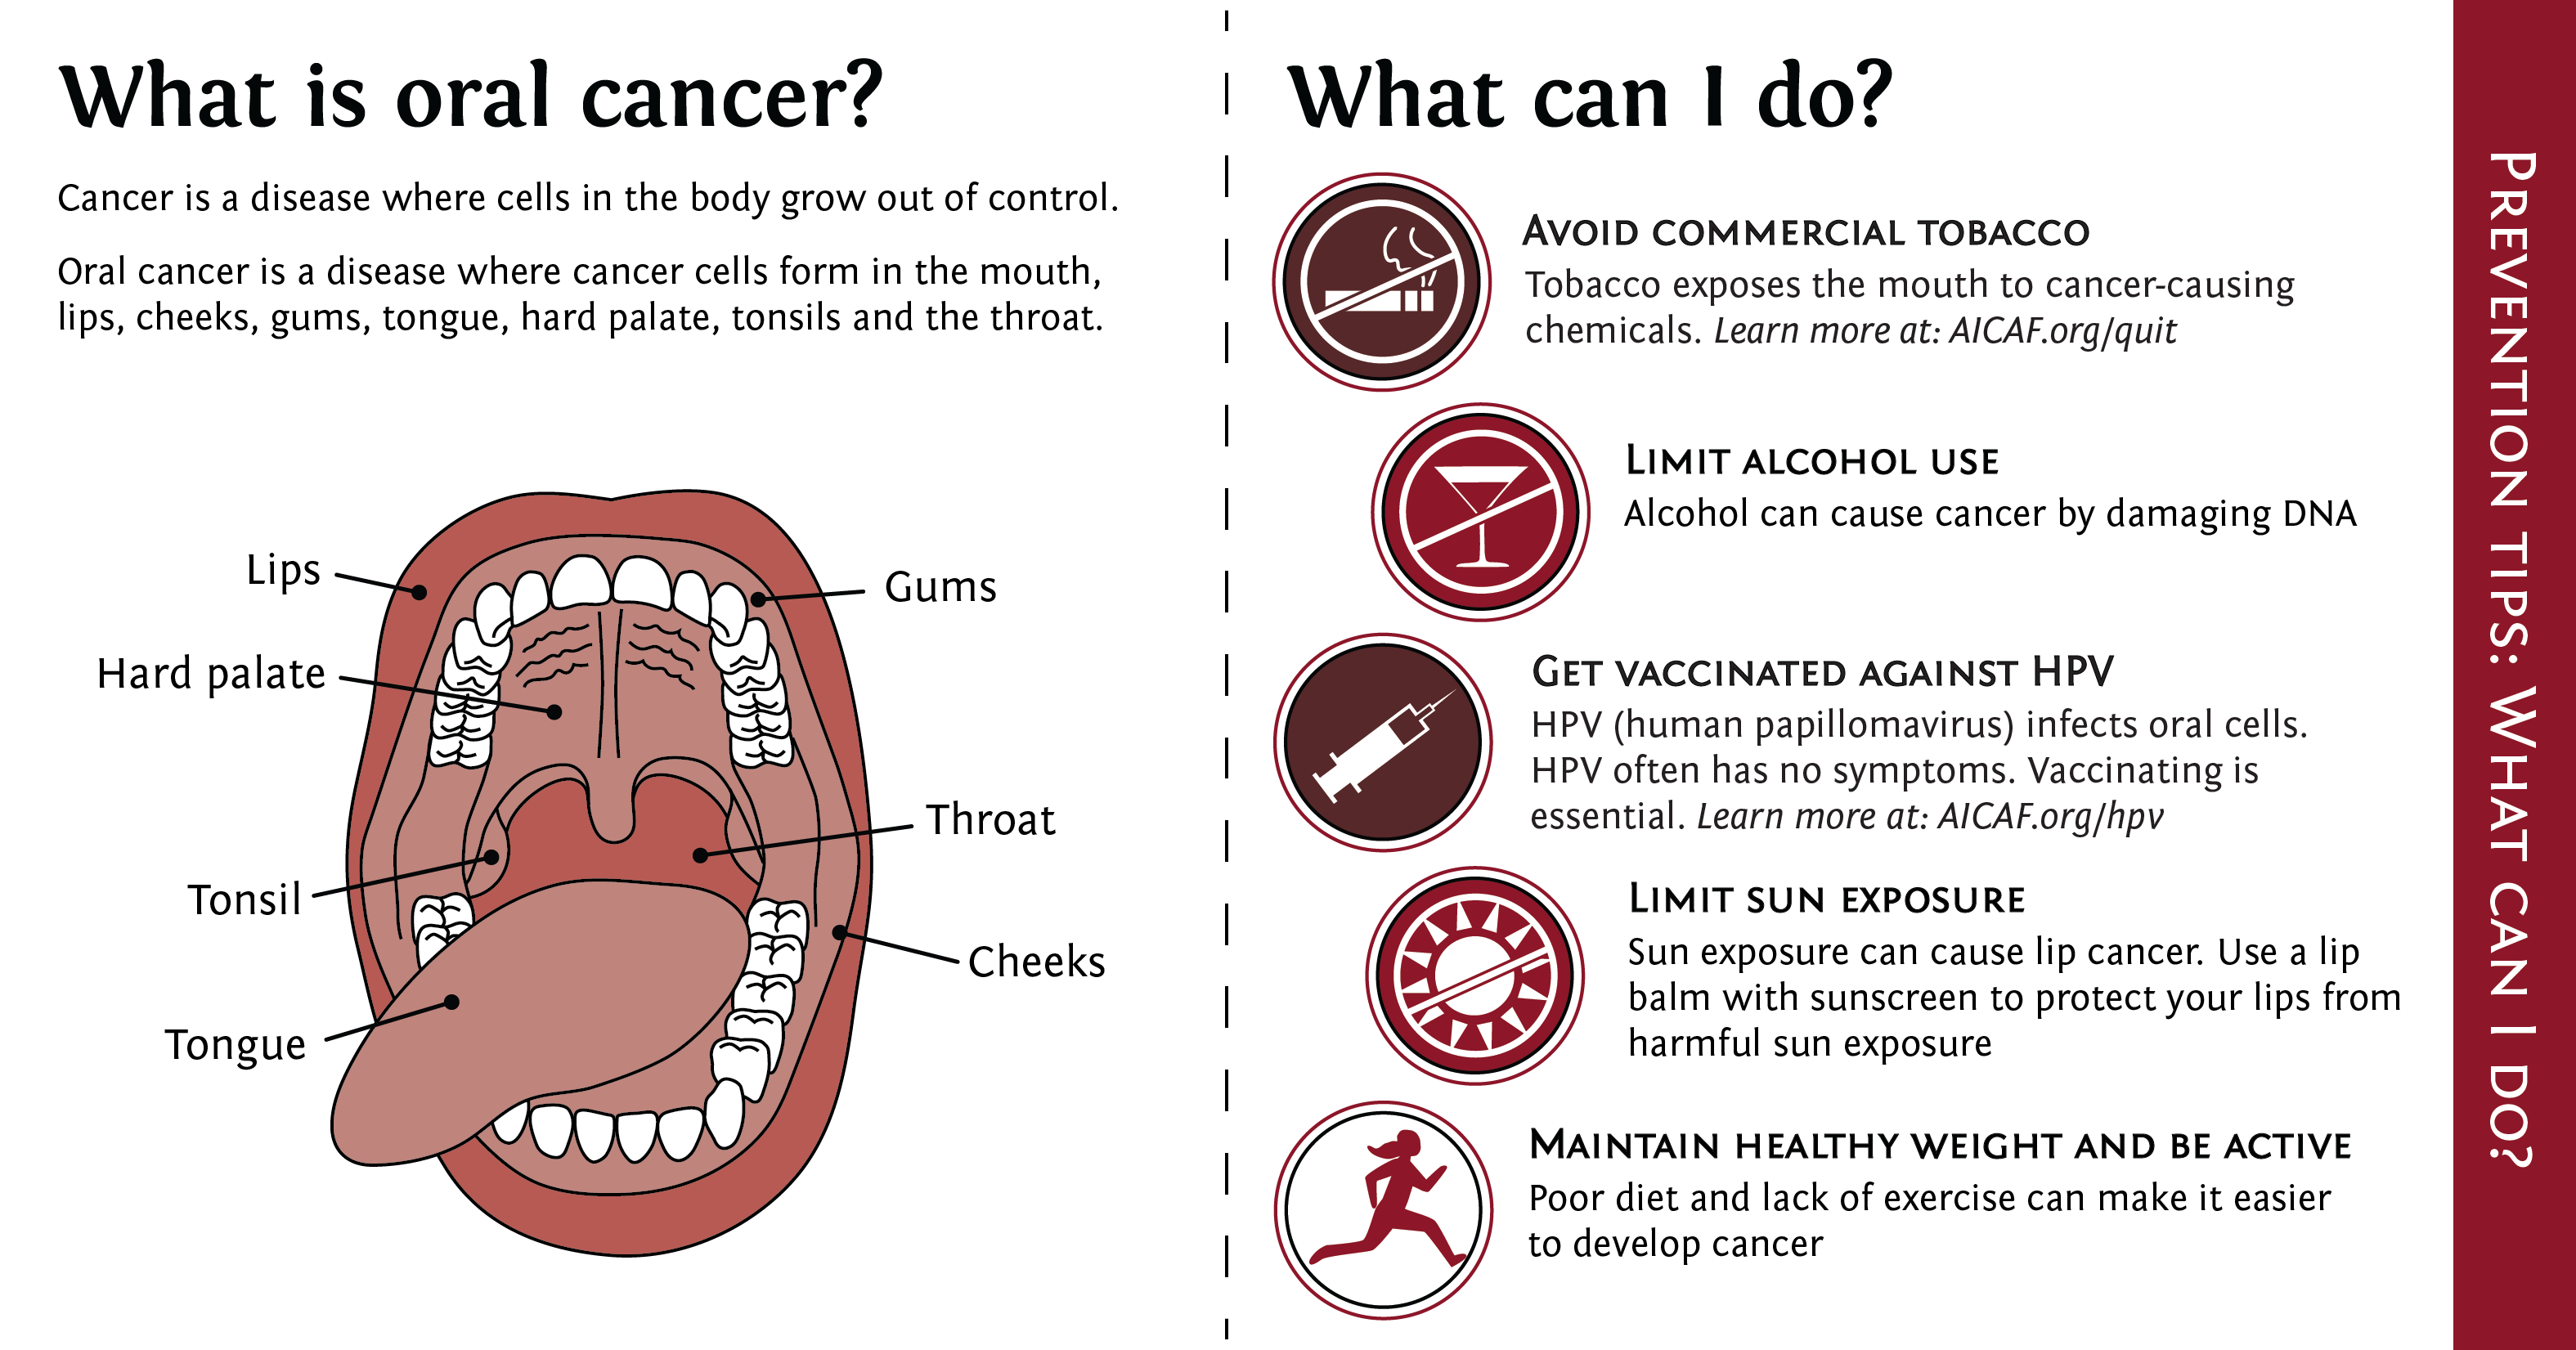 mouth cancer from alcohol